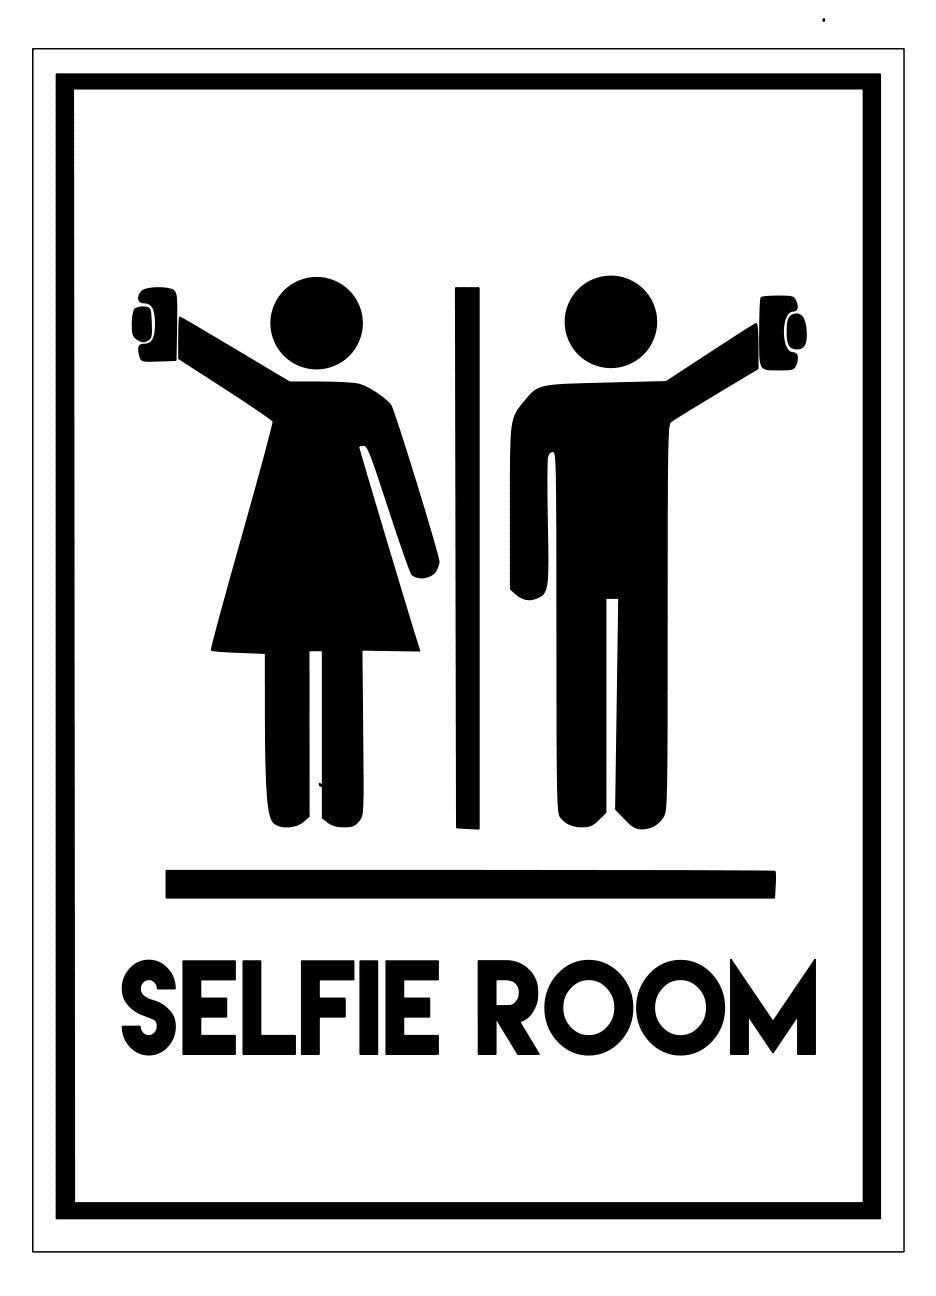 Hammer at Home Bathroom Signs